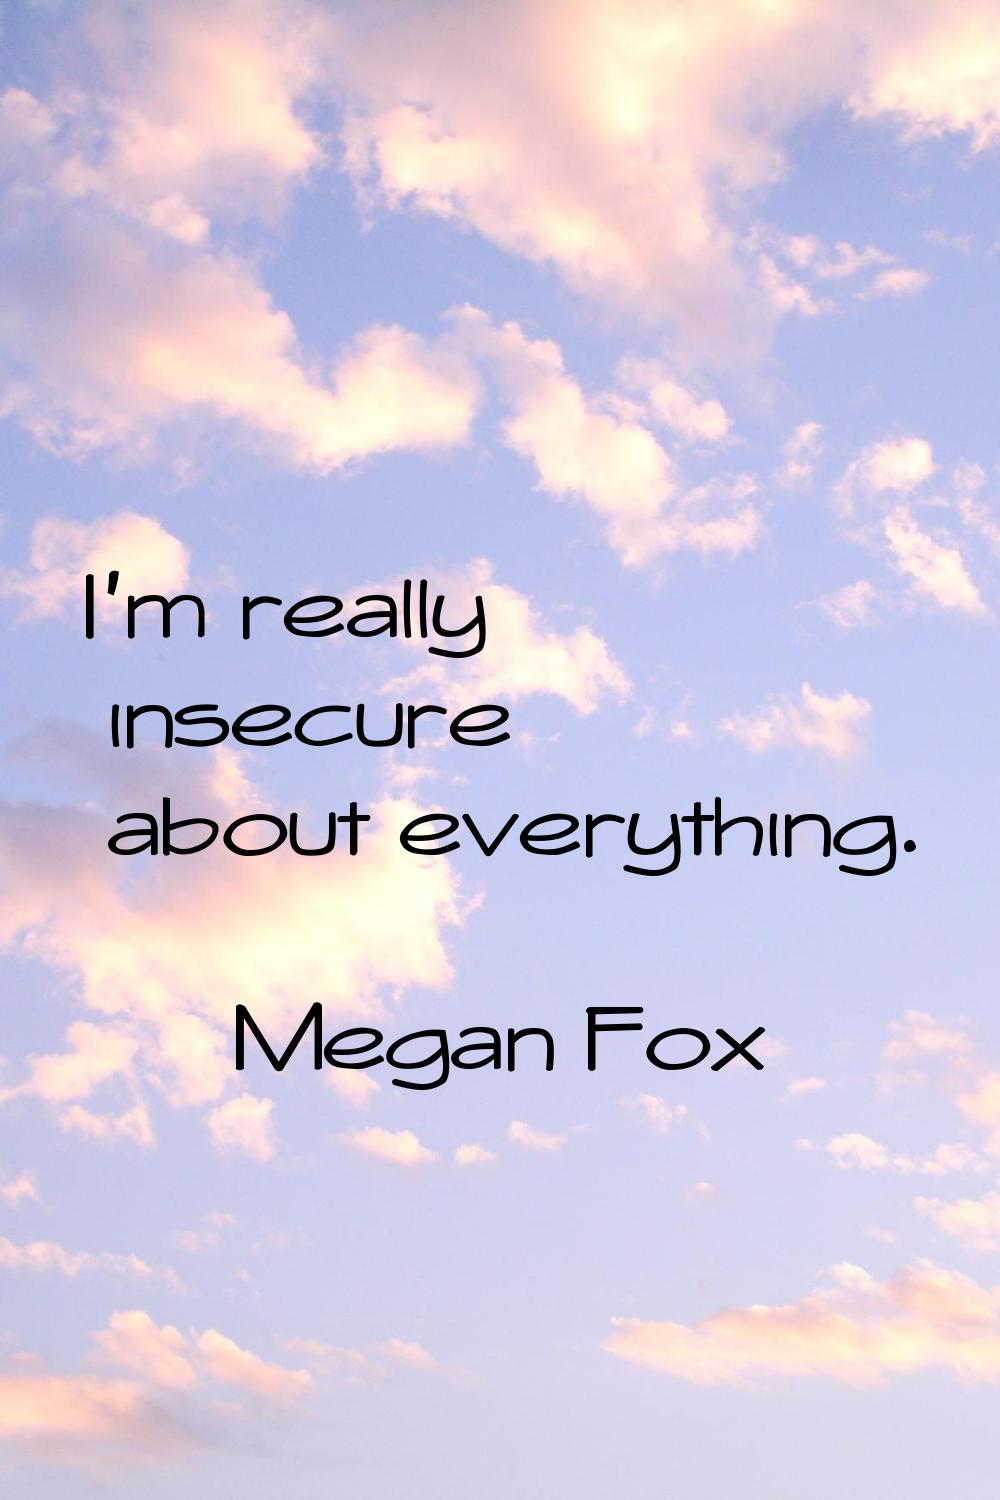 I'm really insecure about everything.